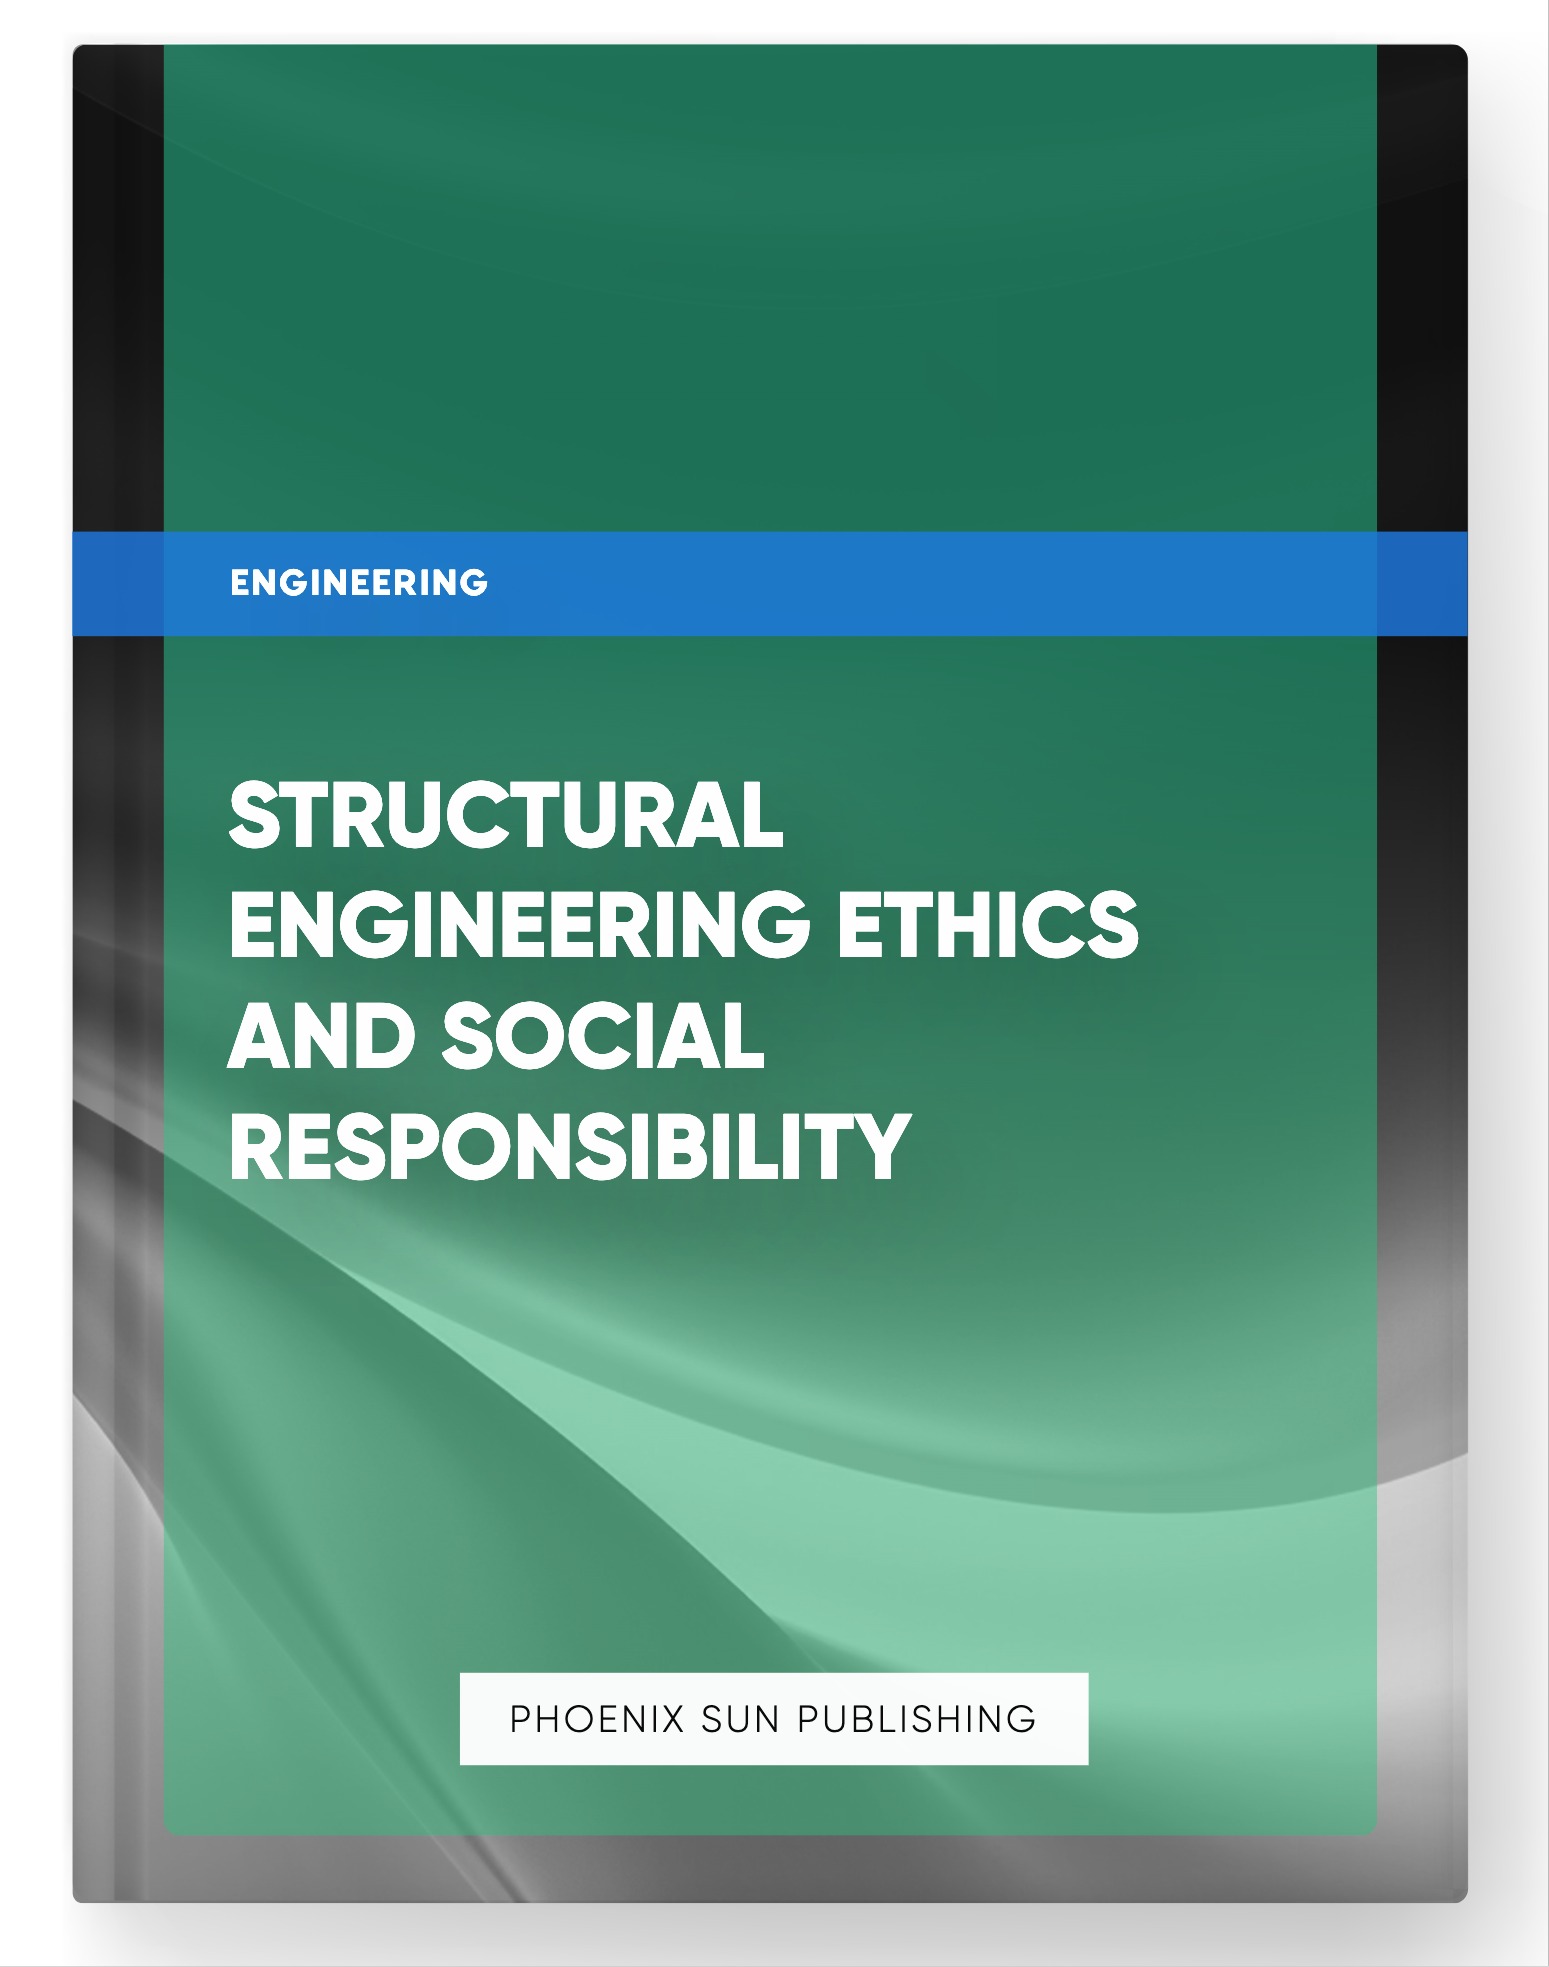 Structural Engineering Ethics and Social Responsibility